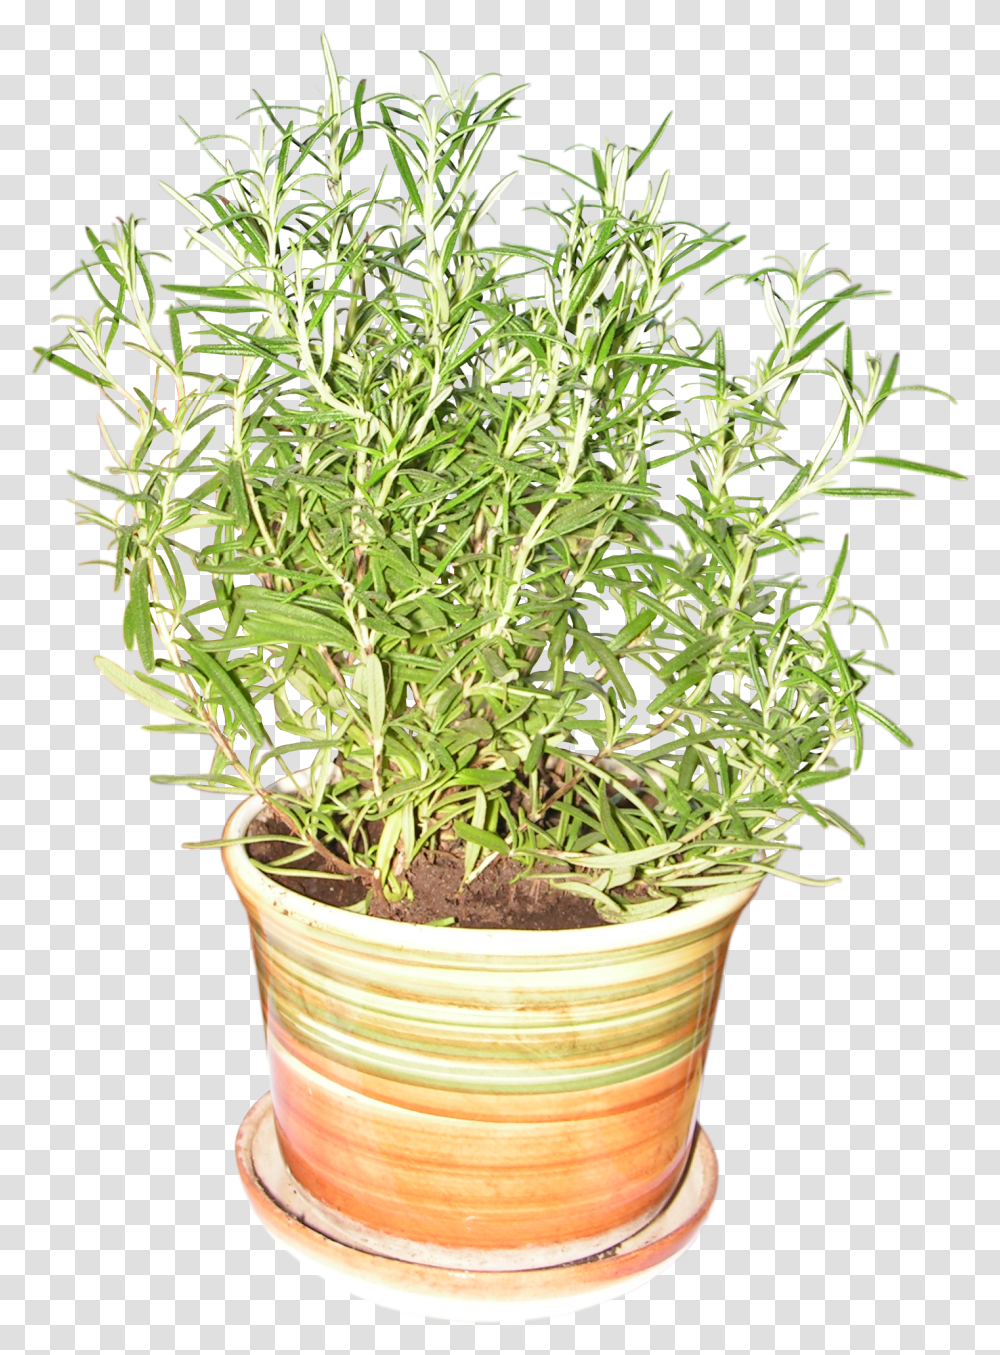 Images Herbs Rosemary Plant, Potted Plant, Vase, Jar, Pottery Transparent Png